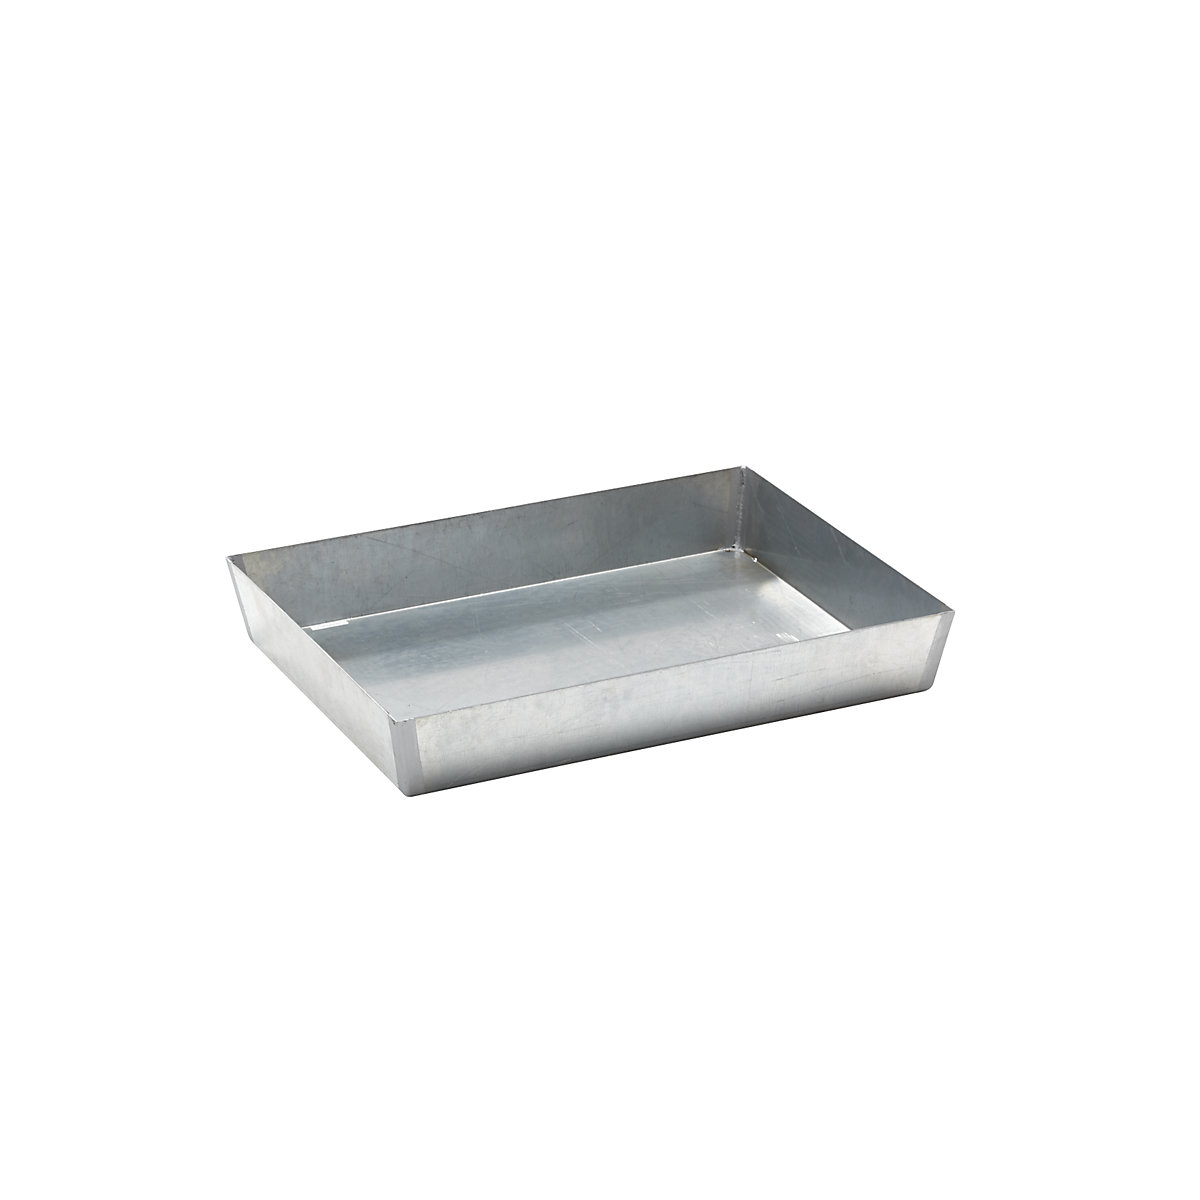 Steel small container pallet tray - eurokraft basic